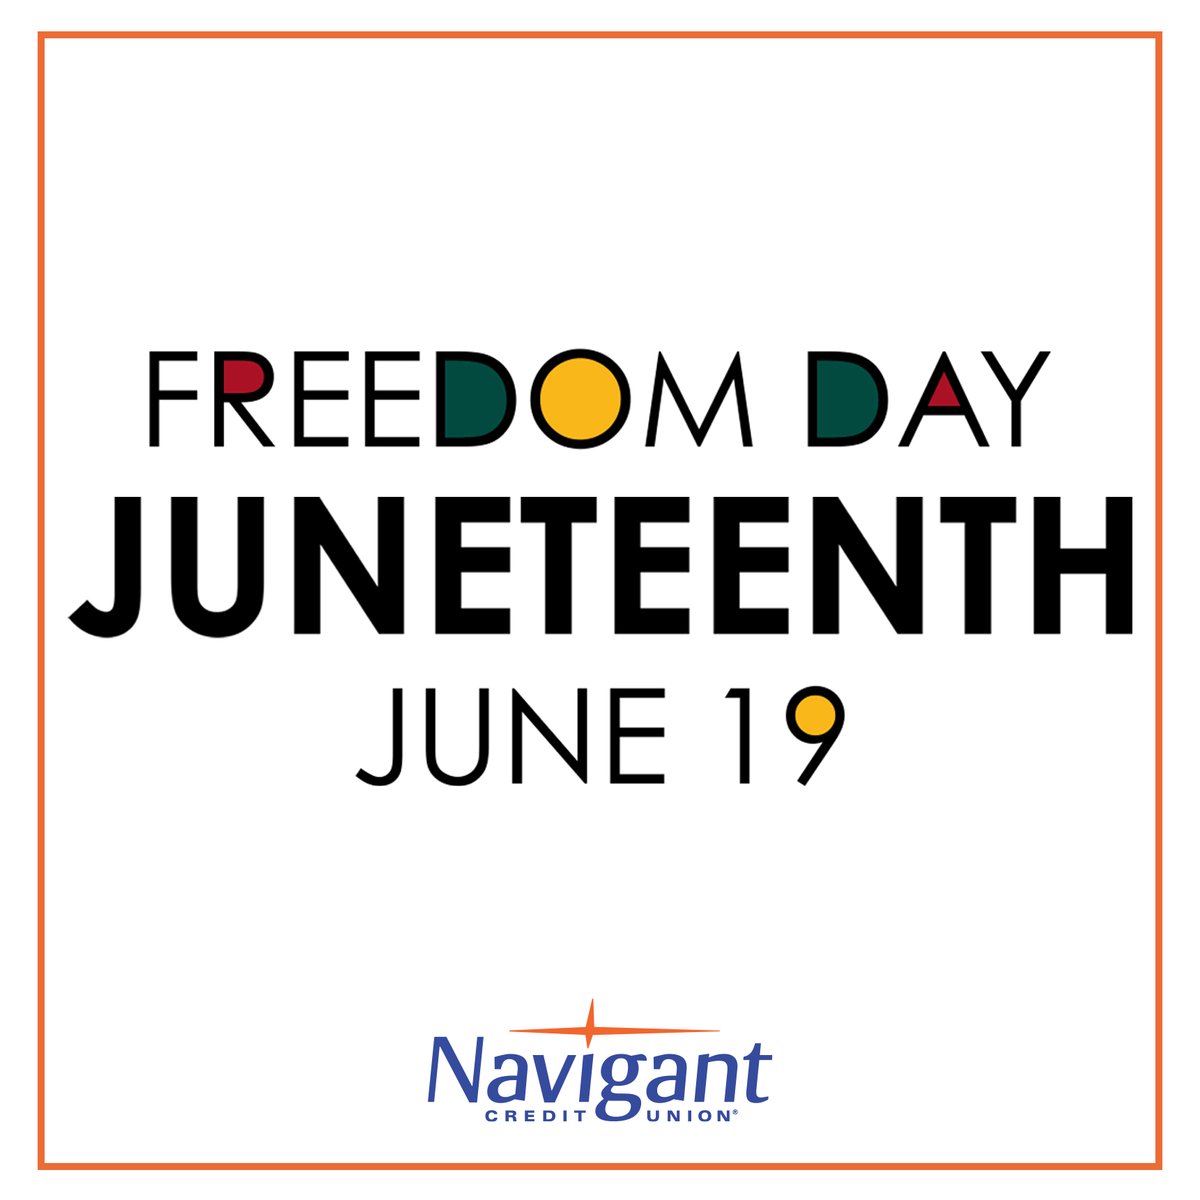 Juneteenth: We too must never forget. A friendly reminder that all Navigant Credit Union branch locations will be closed today, June-19, in observance of Juneteenth.